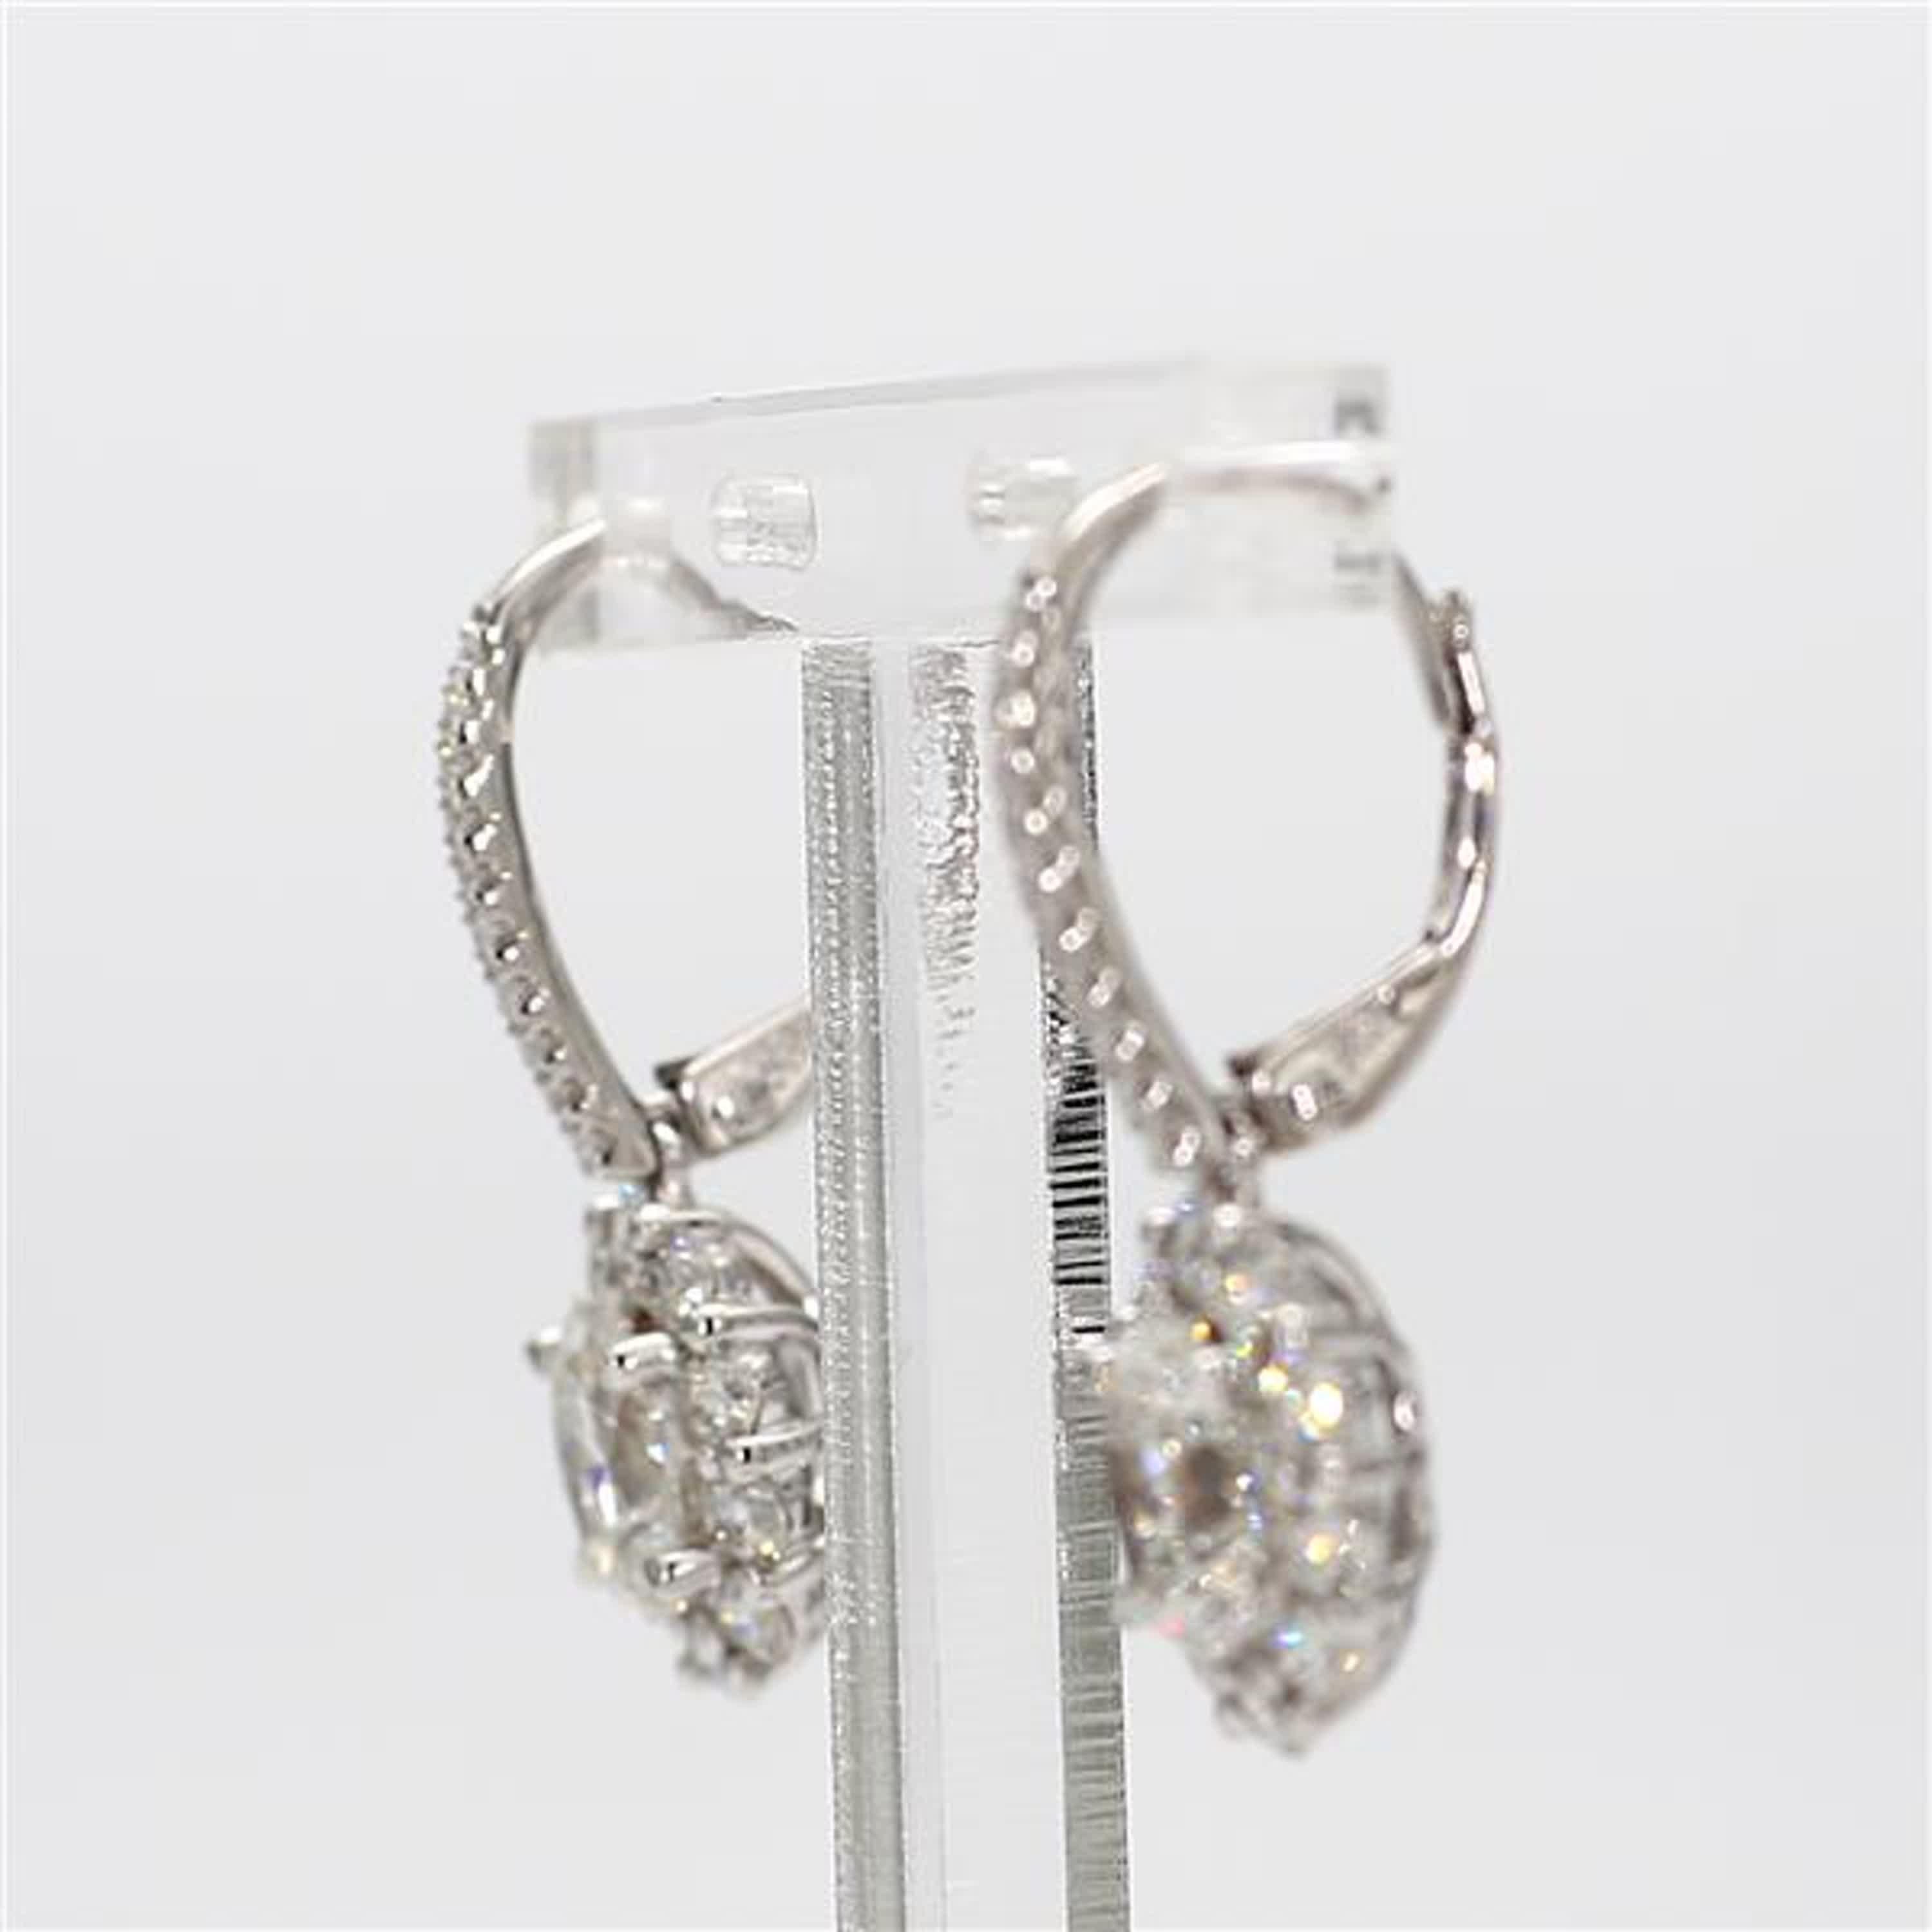 Contemporary Natural White Oval Diamond 2.40 Carat TW White Gold Drop Earrings